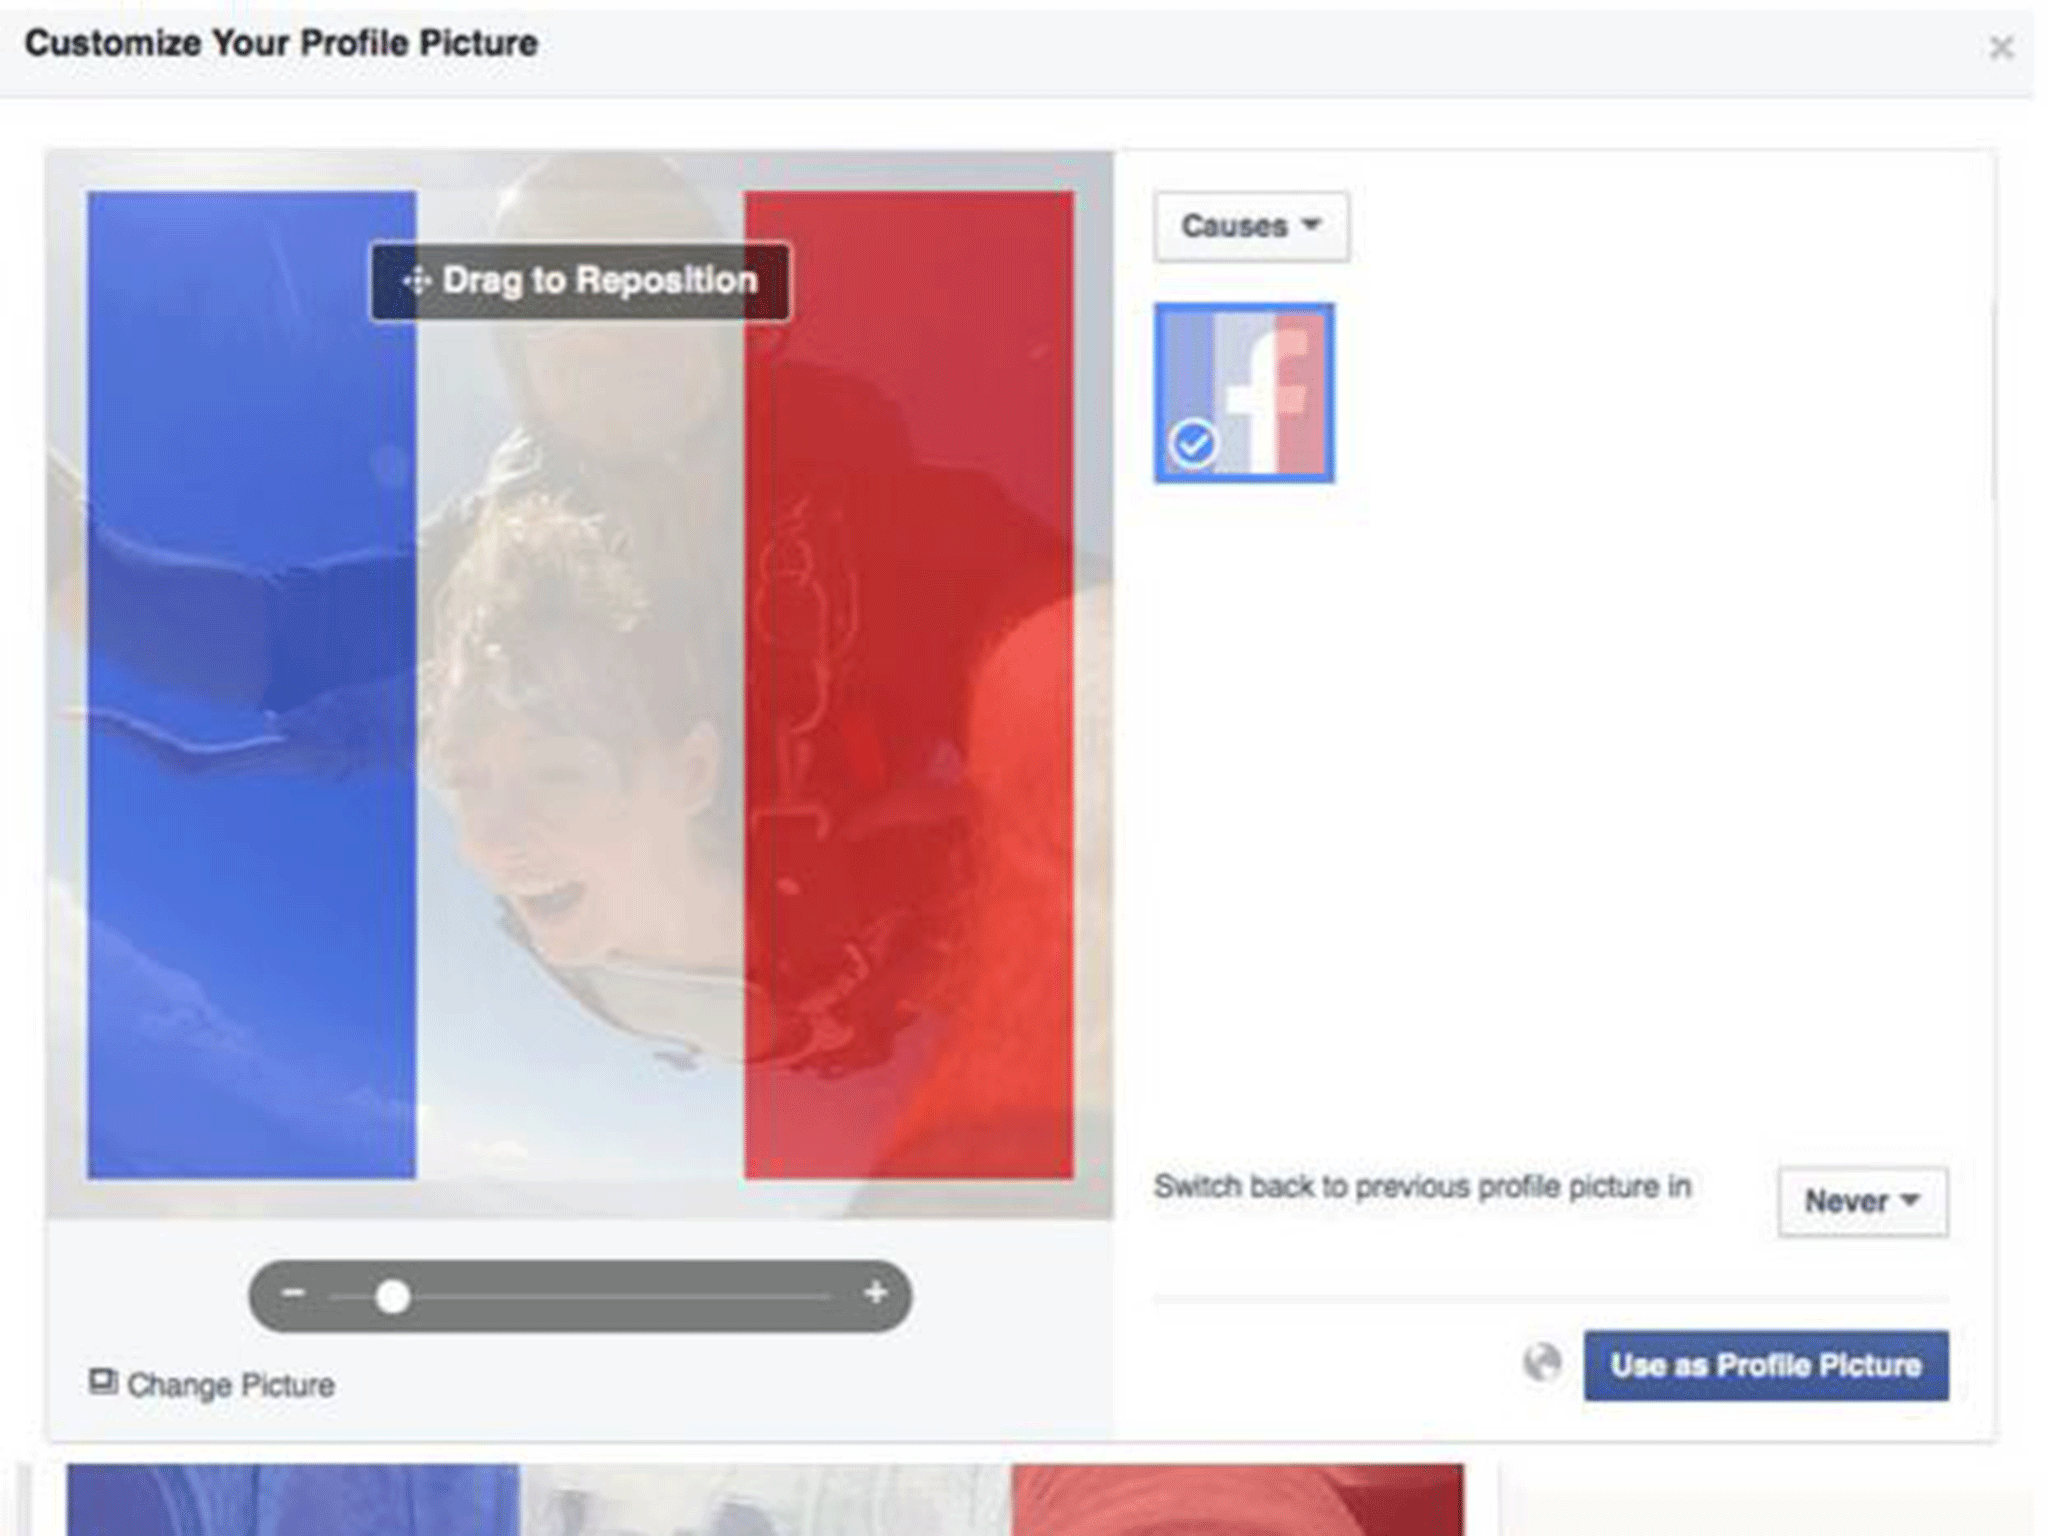 The French flag filter can go over profile pictures on Facebook